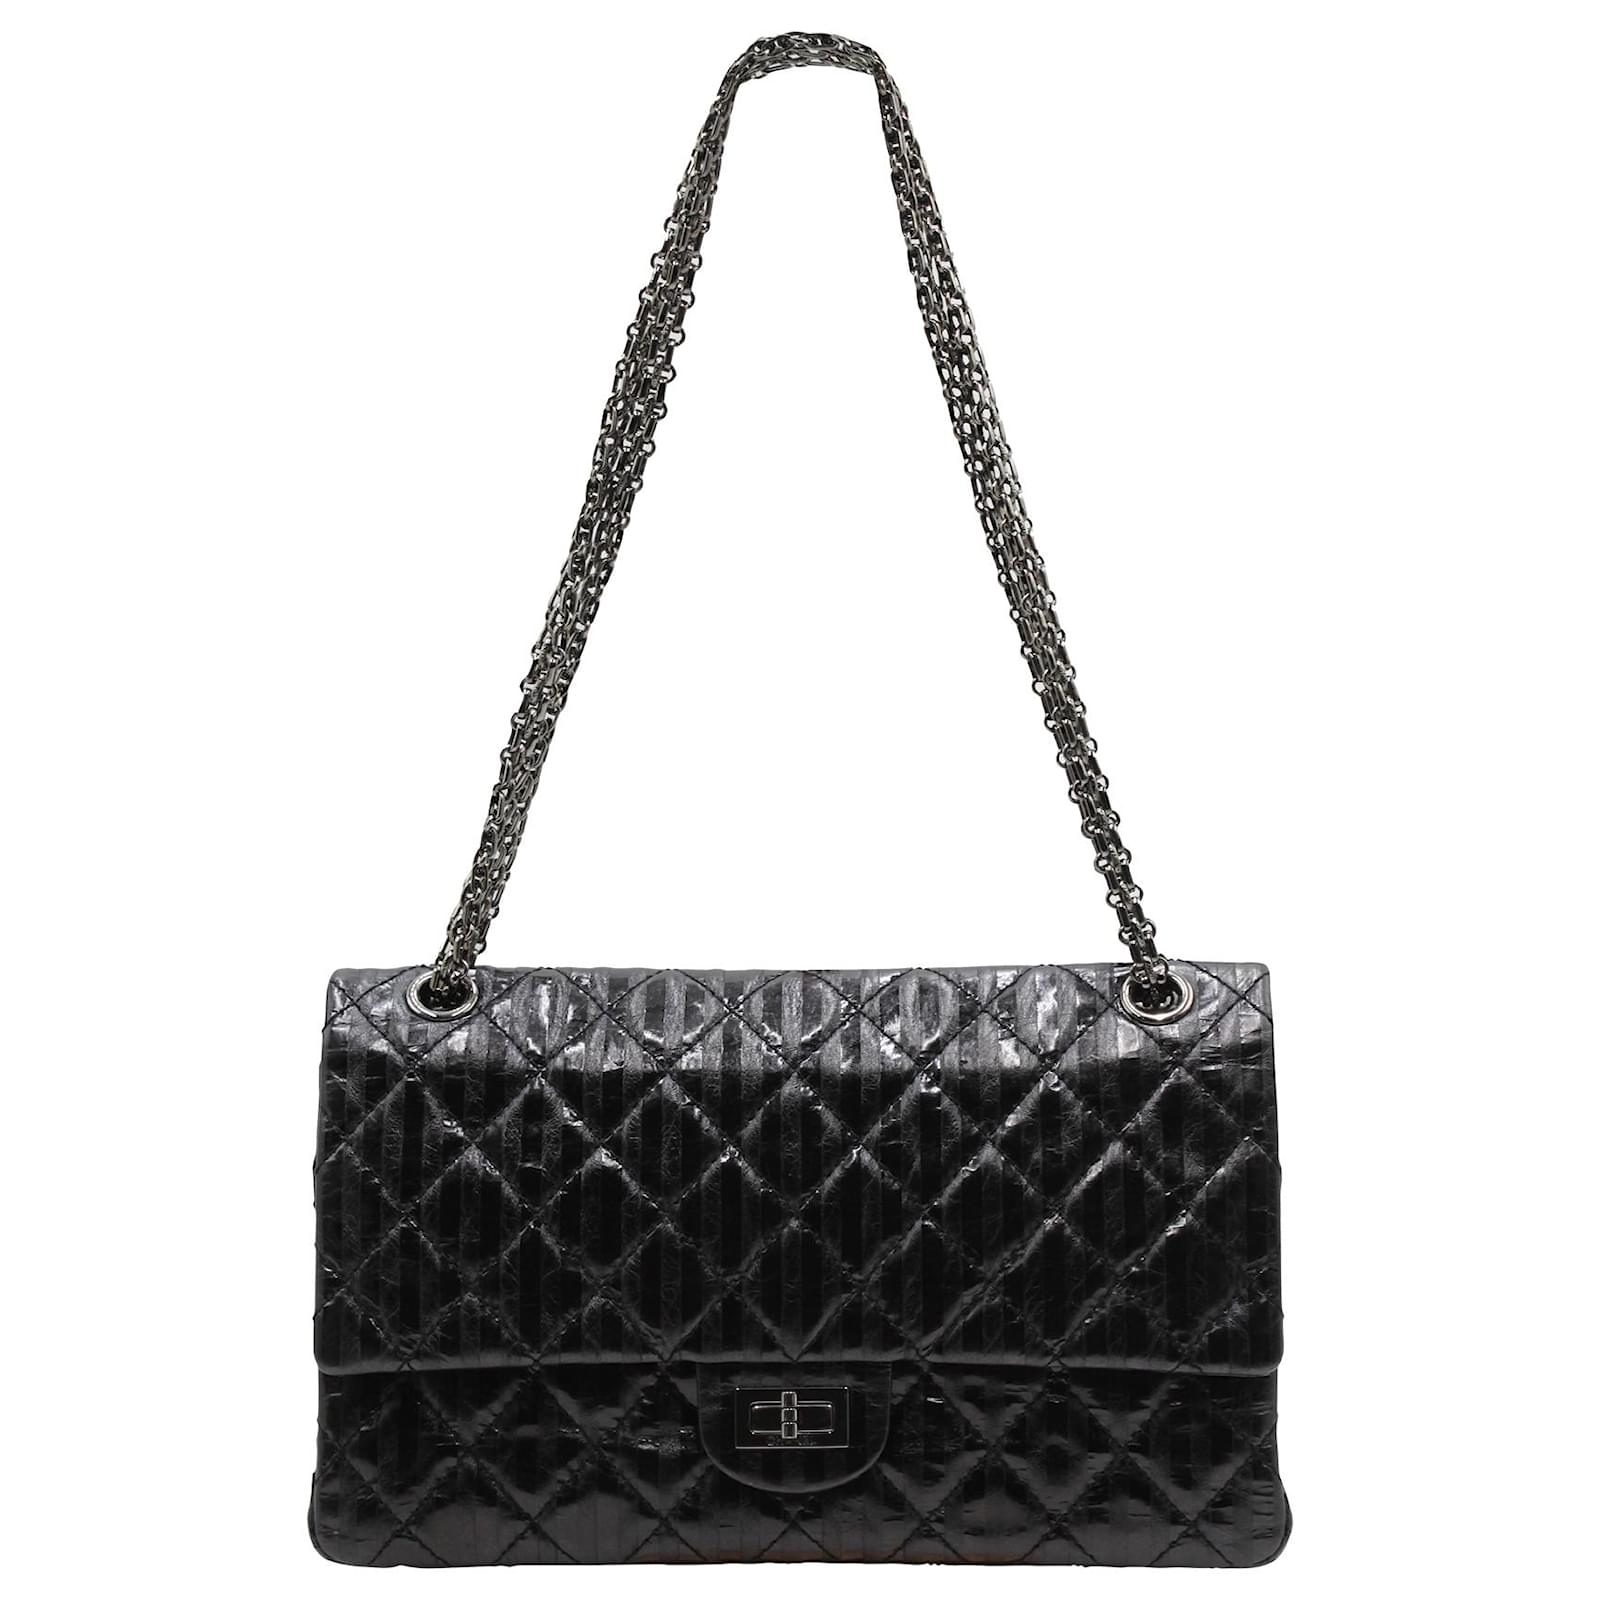 Chanel Navy Blue Quilted Caviar Leather Reissue 2.55 Classic 227 Flap Bag  Chanel